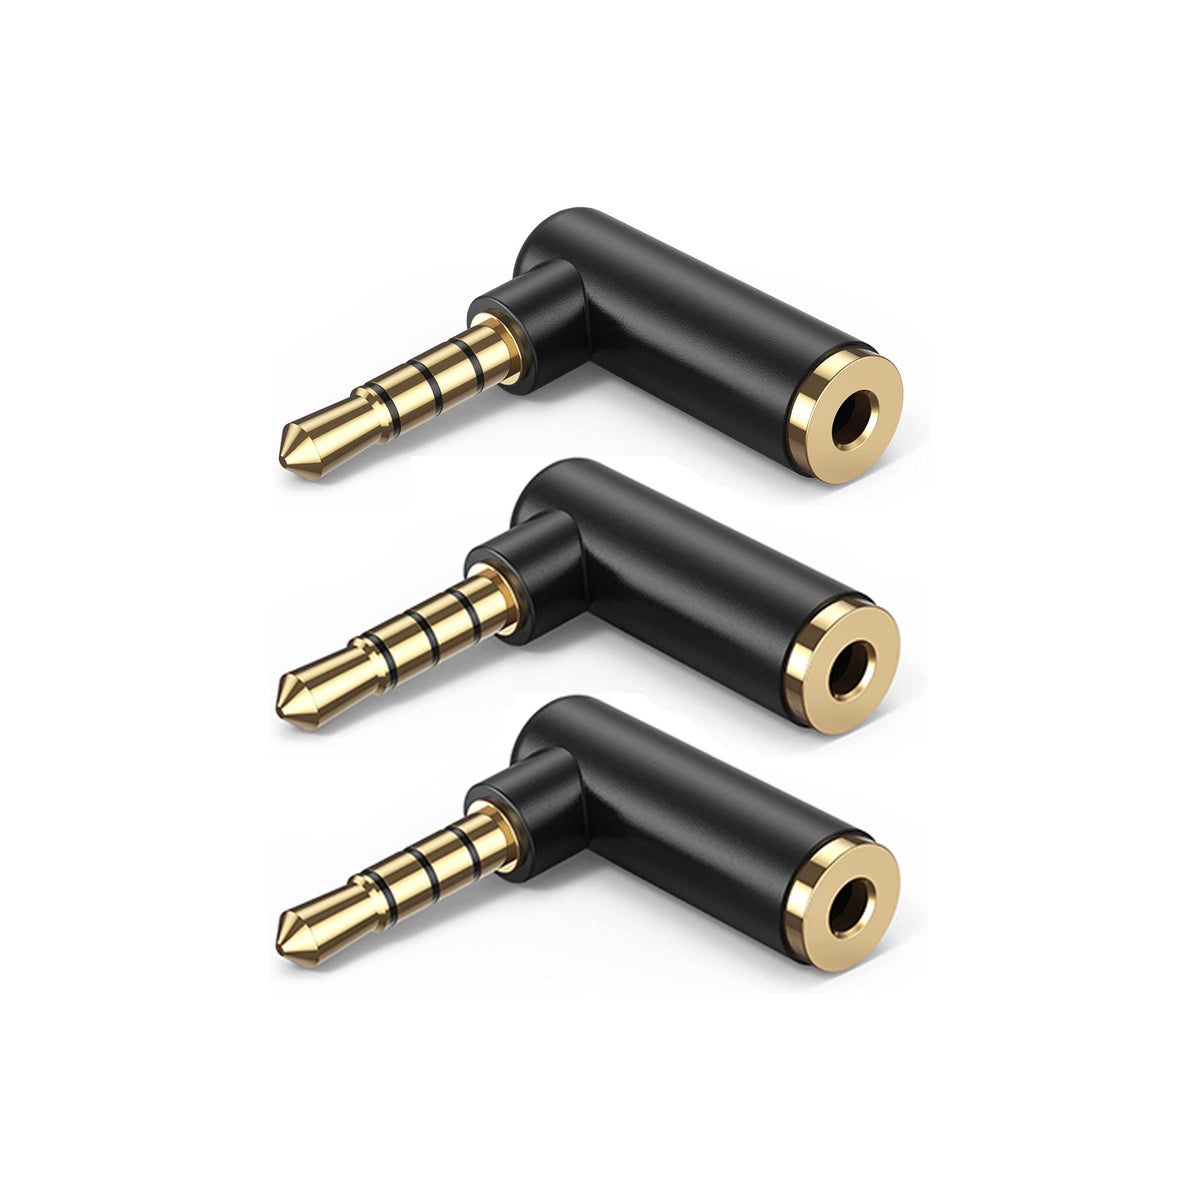 3.5mm Audio Adapter For Headphone